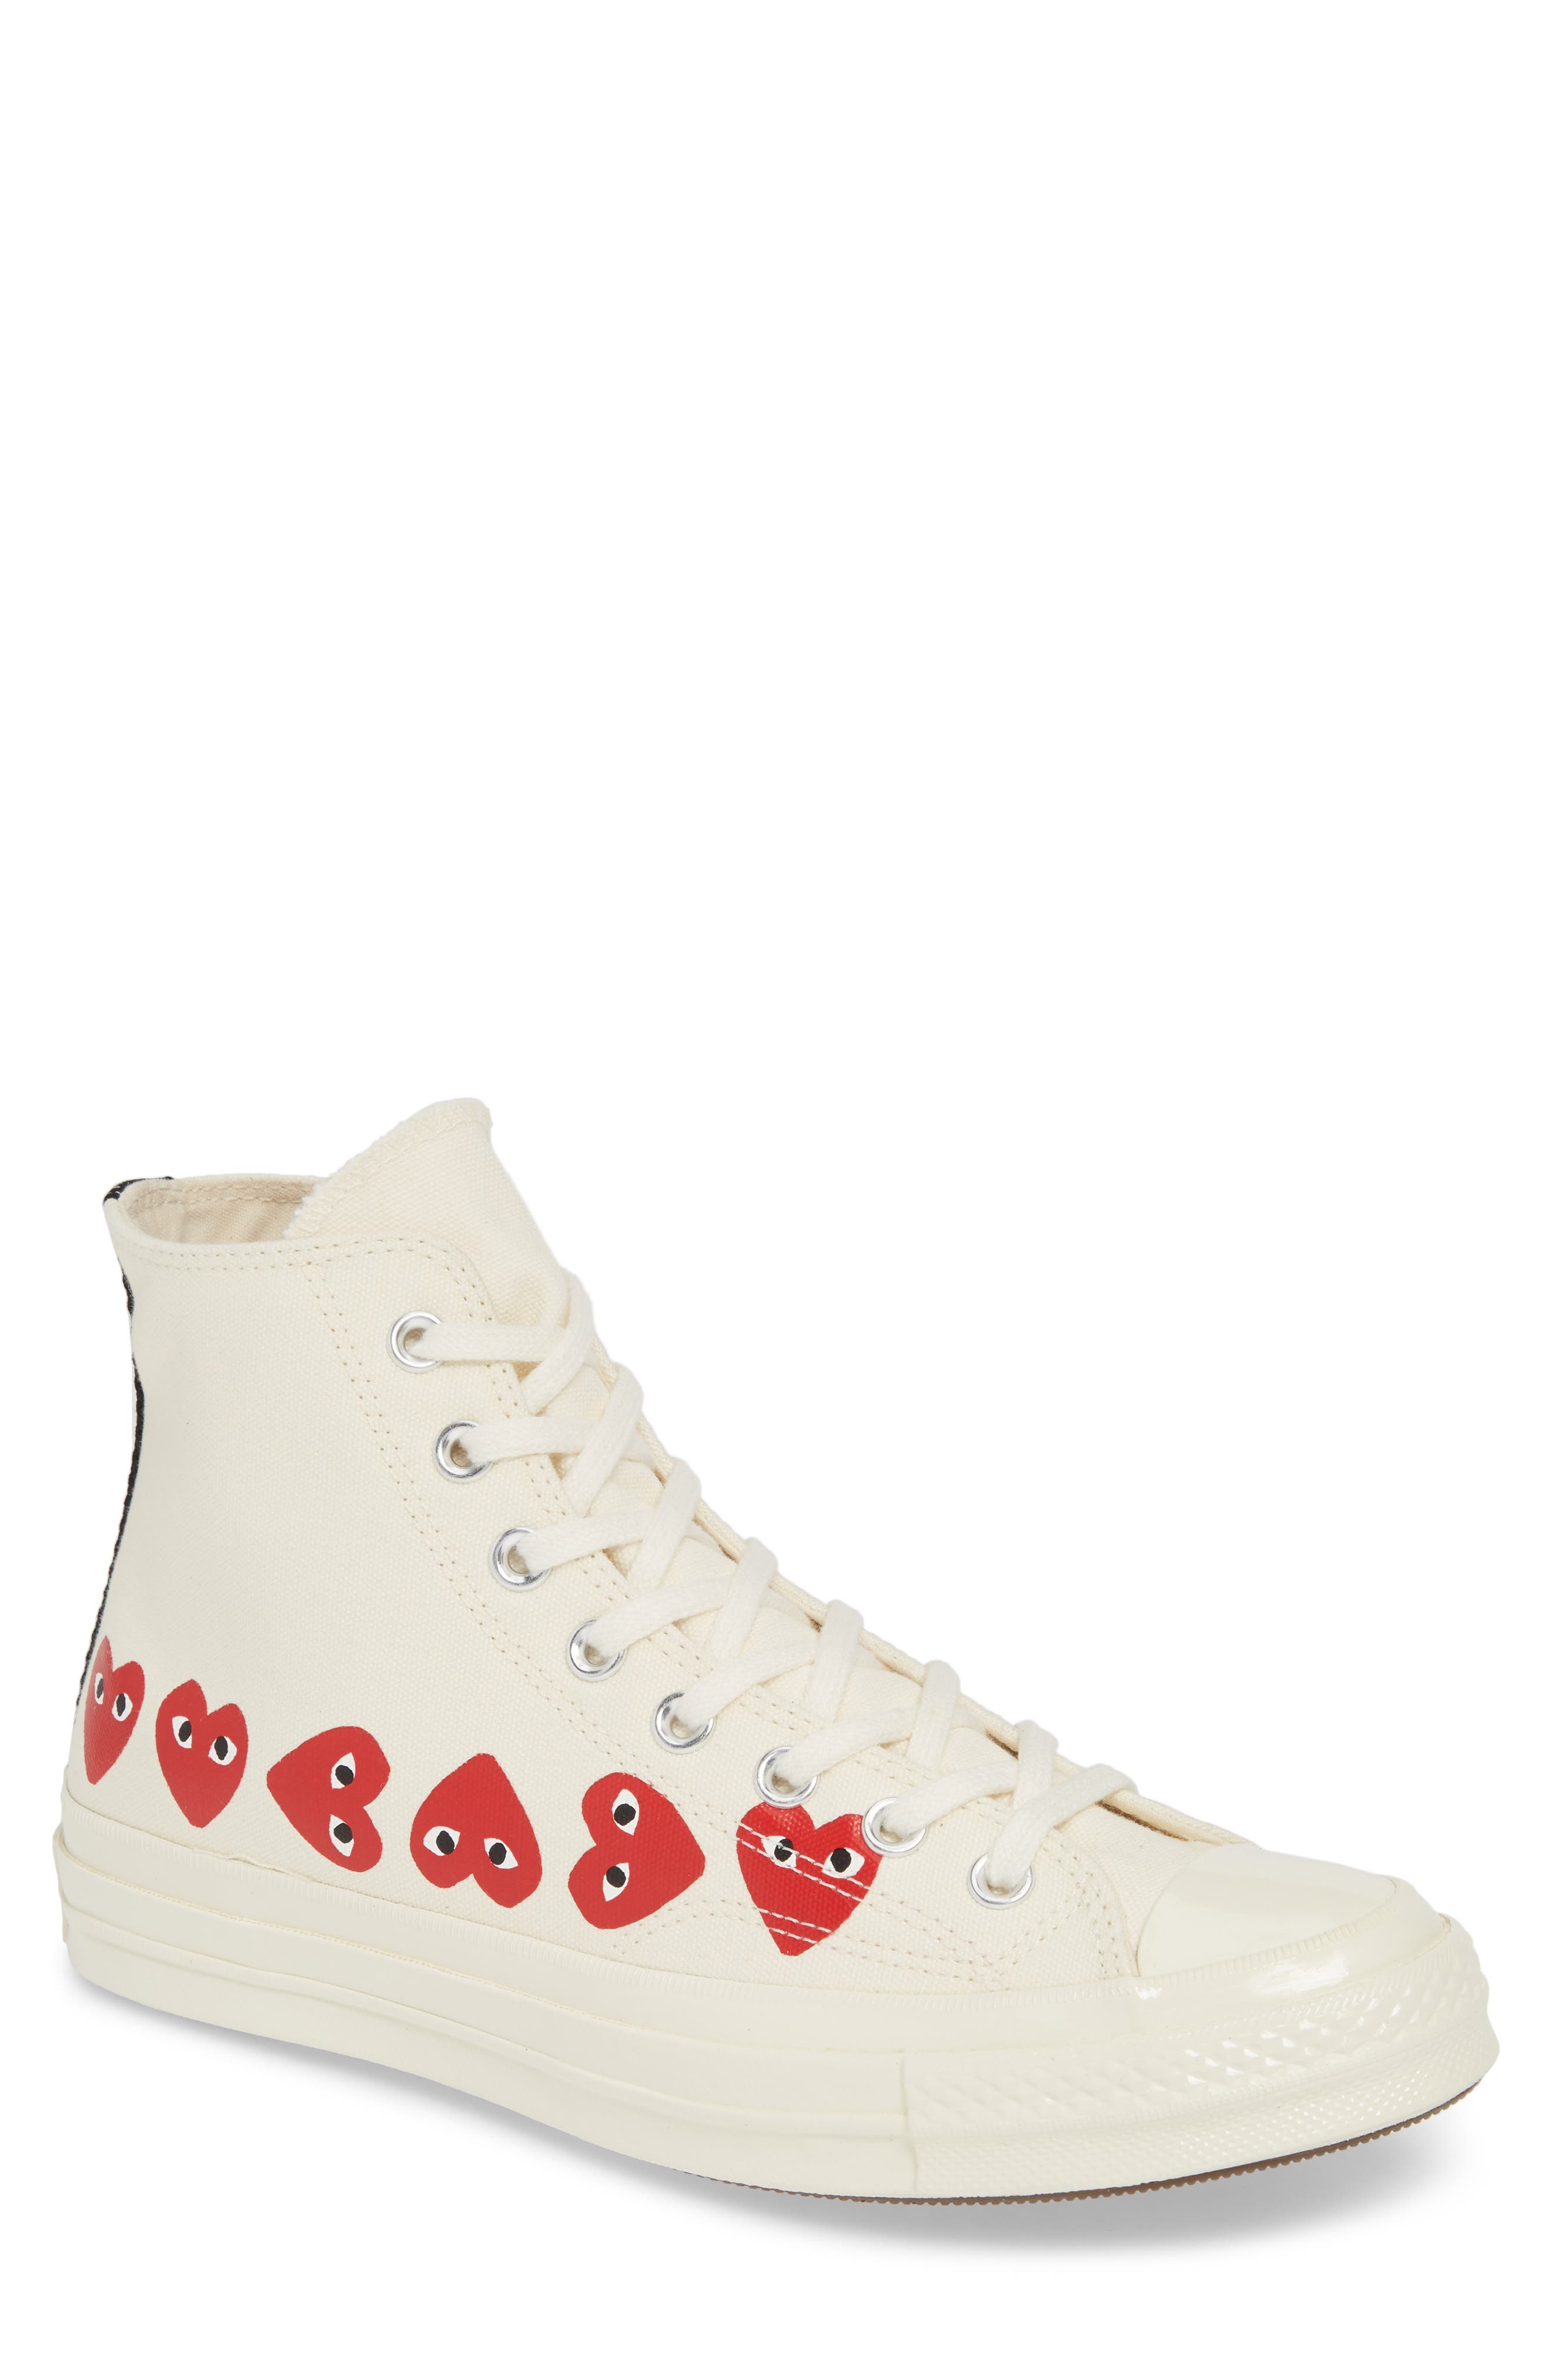 size 12 cdg converse